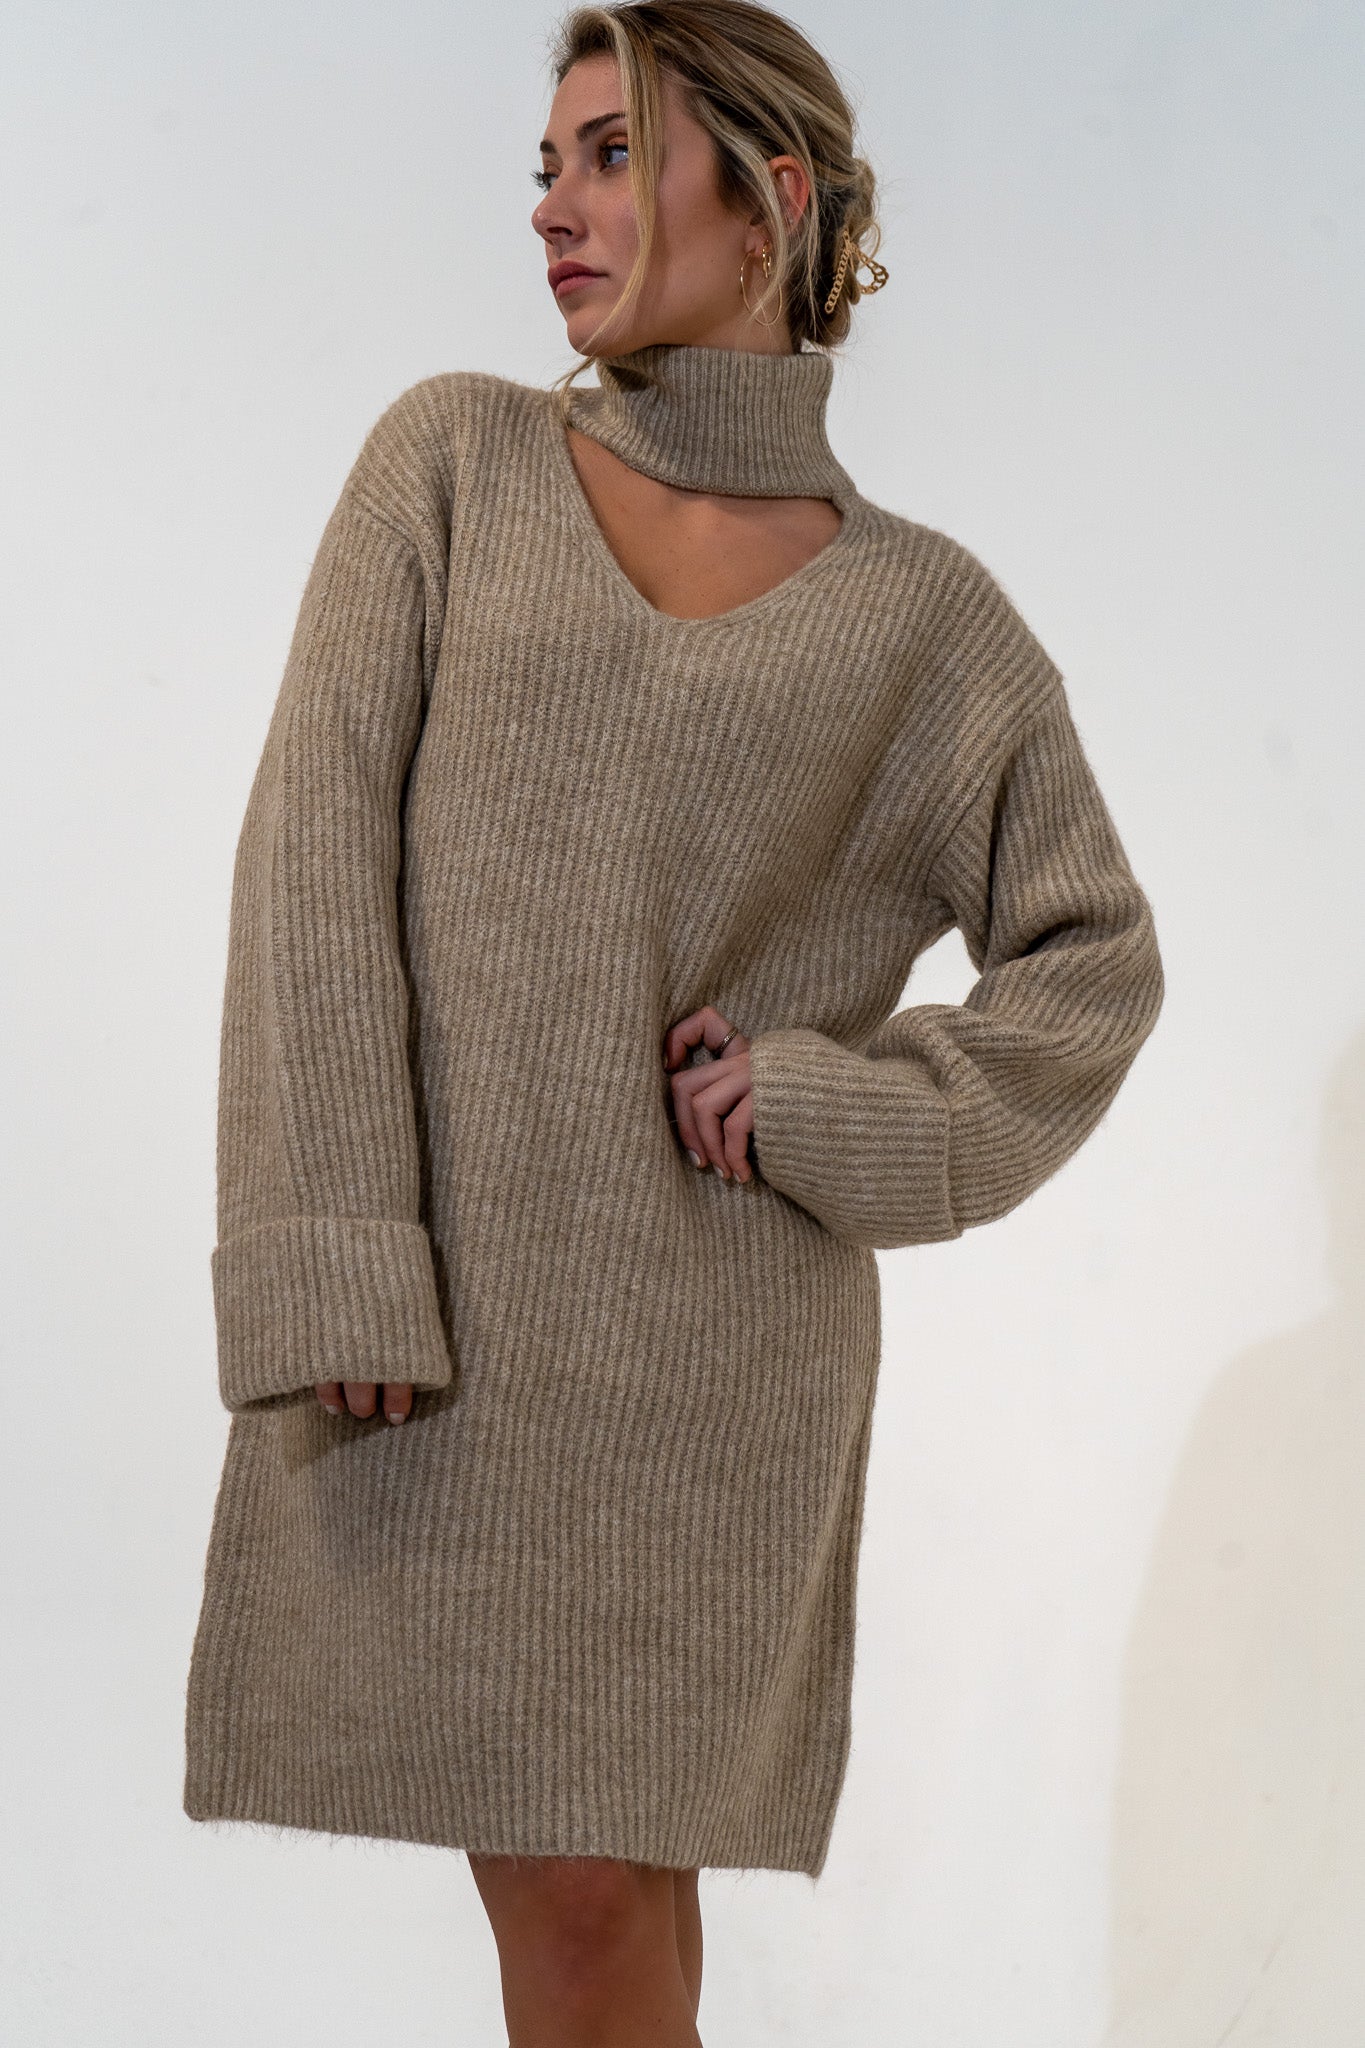 Featuring a relaxed fit, The Kate Sweater Dress is an effortlessly cool design that pairs well with just about everything, while our favorite way to style is with tights and your favorite pair of boots. Mock neck with a V-style cut out on chest. Oversized cuffed sleeves. Quality ribbed material, slightly brushed. 